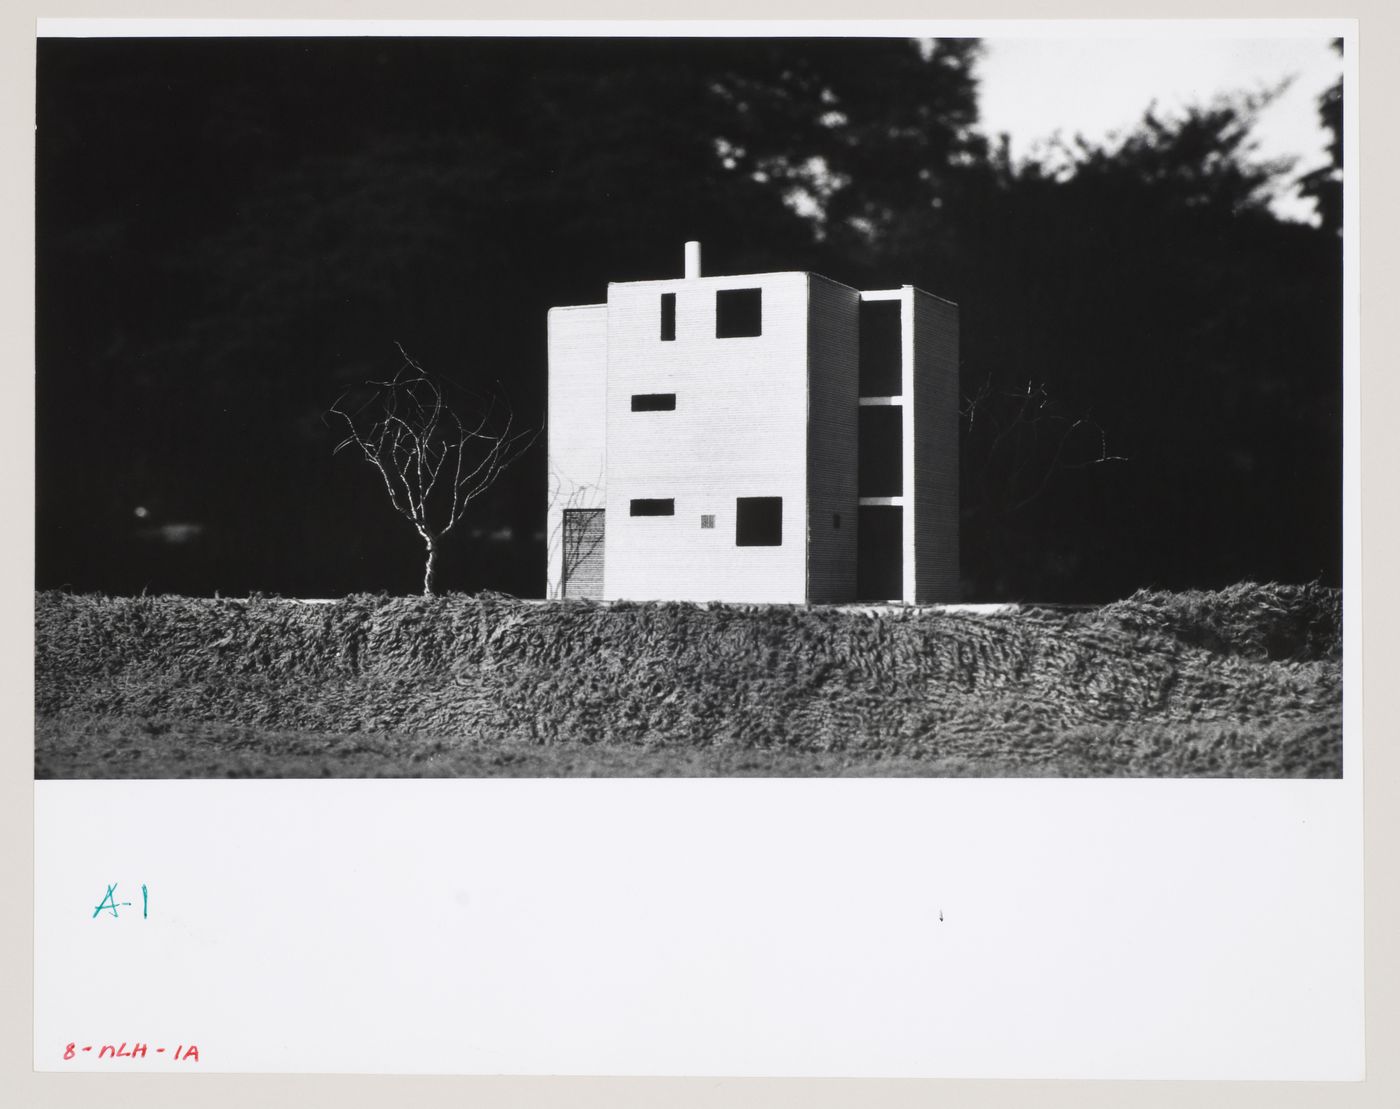 House in North London, Mill Hill, London, England: view of model